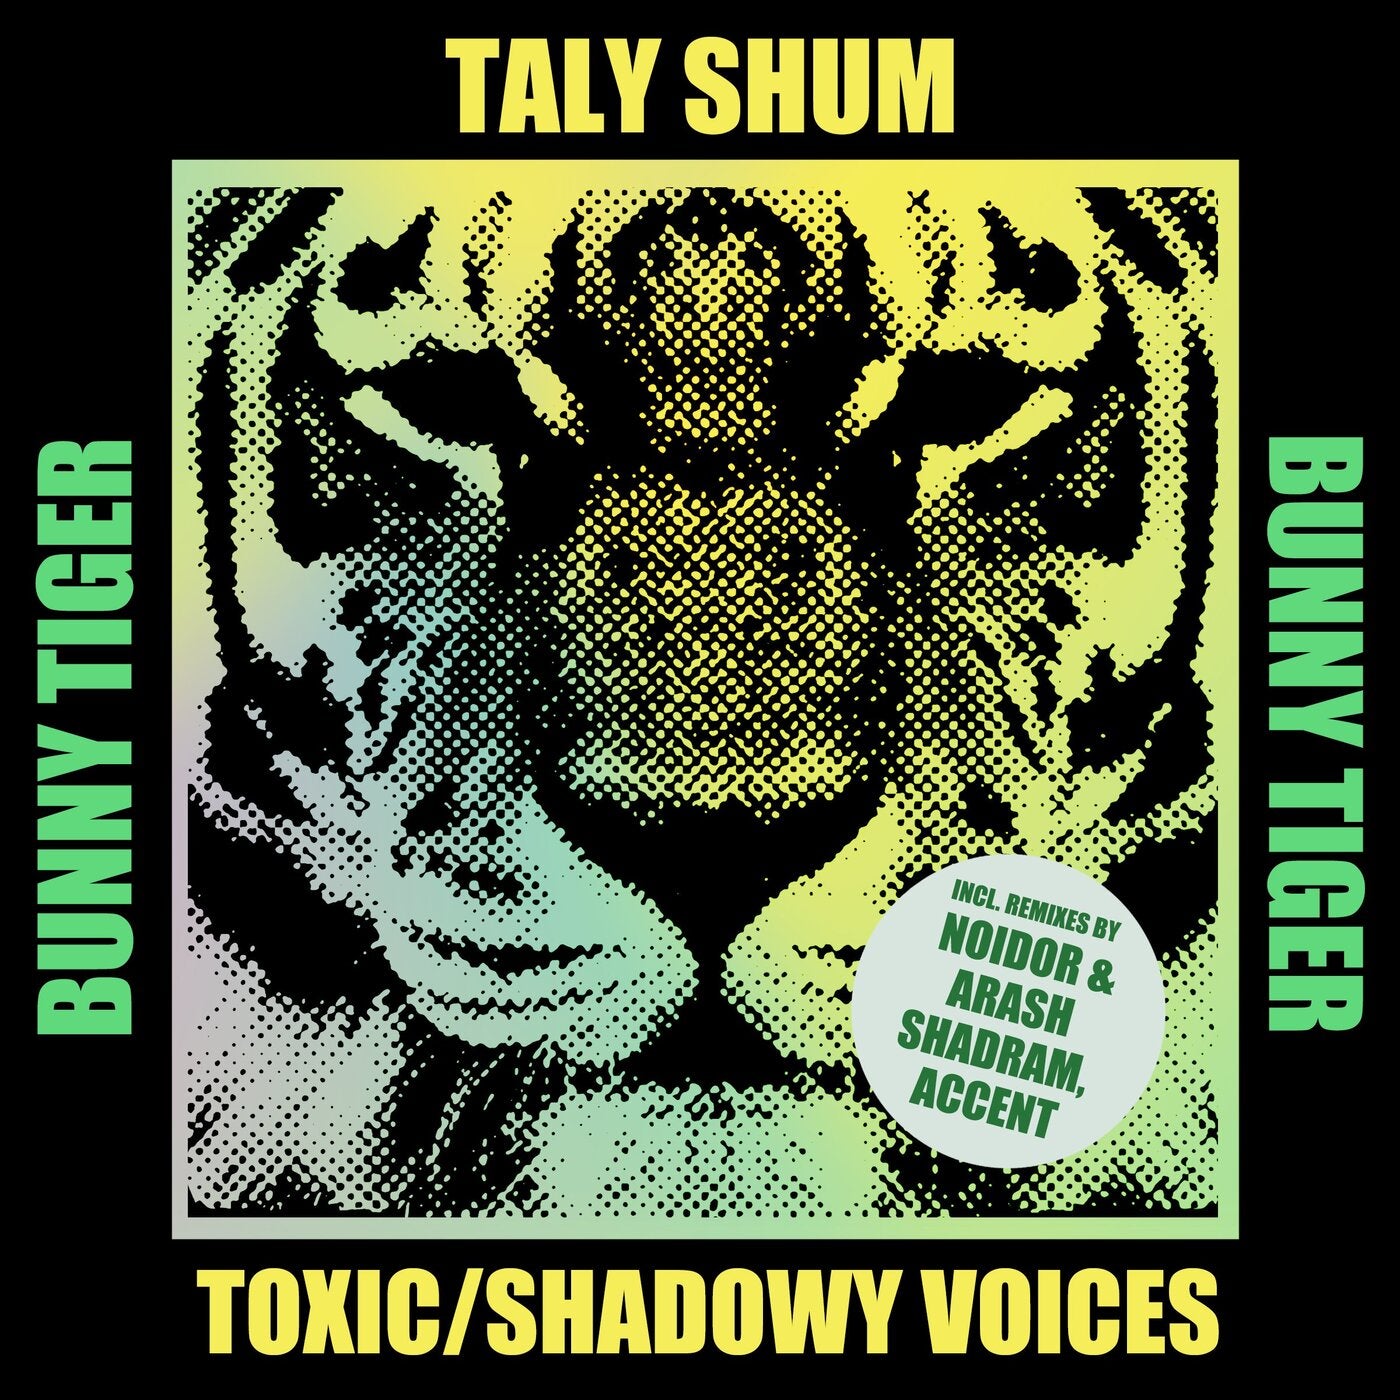 Taly Shum - Toxic , Shadowy Voices [Bunny Tiger]